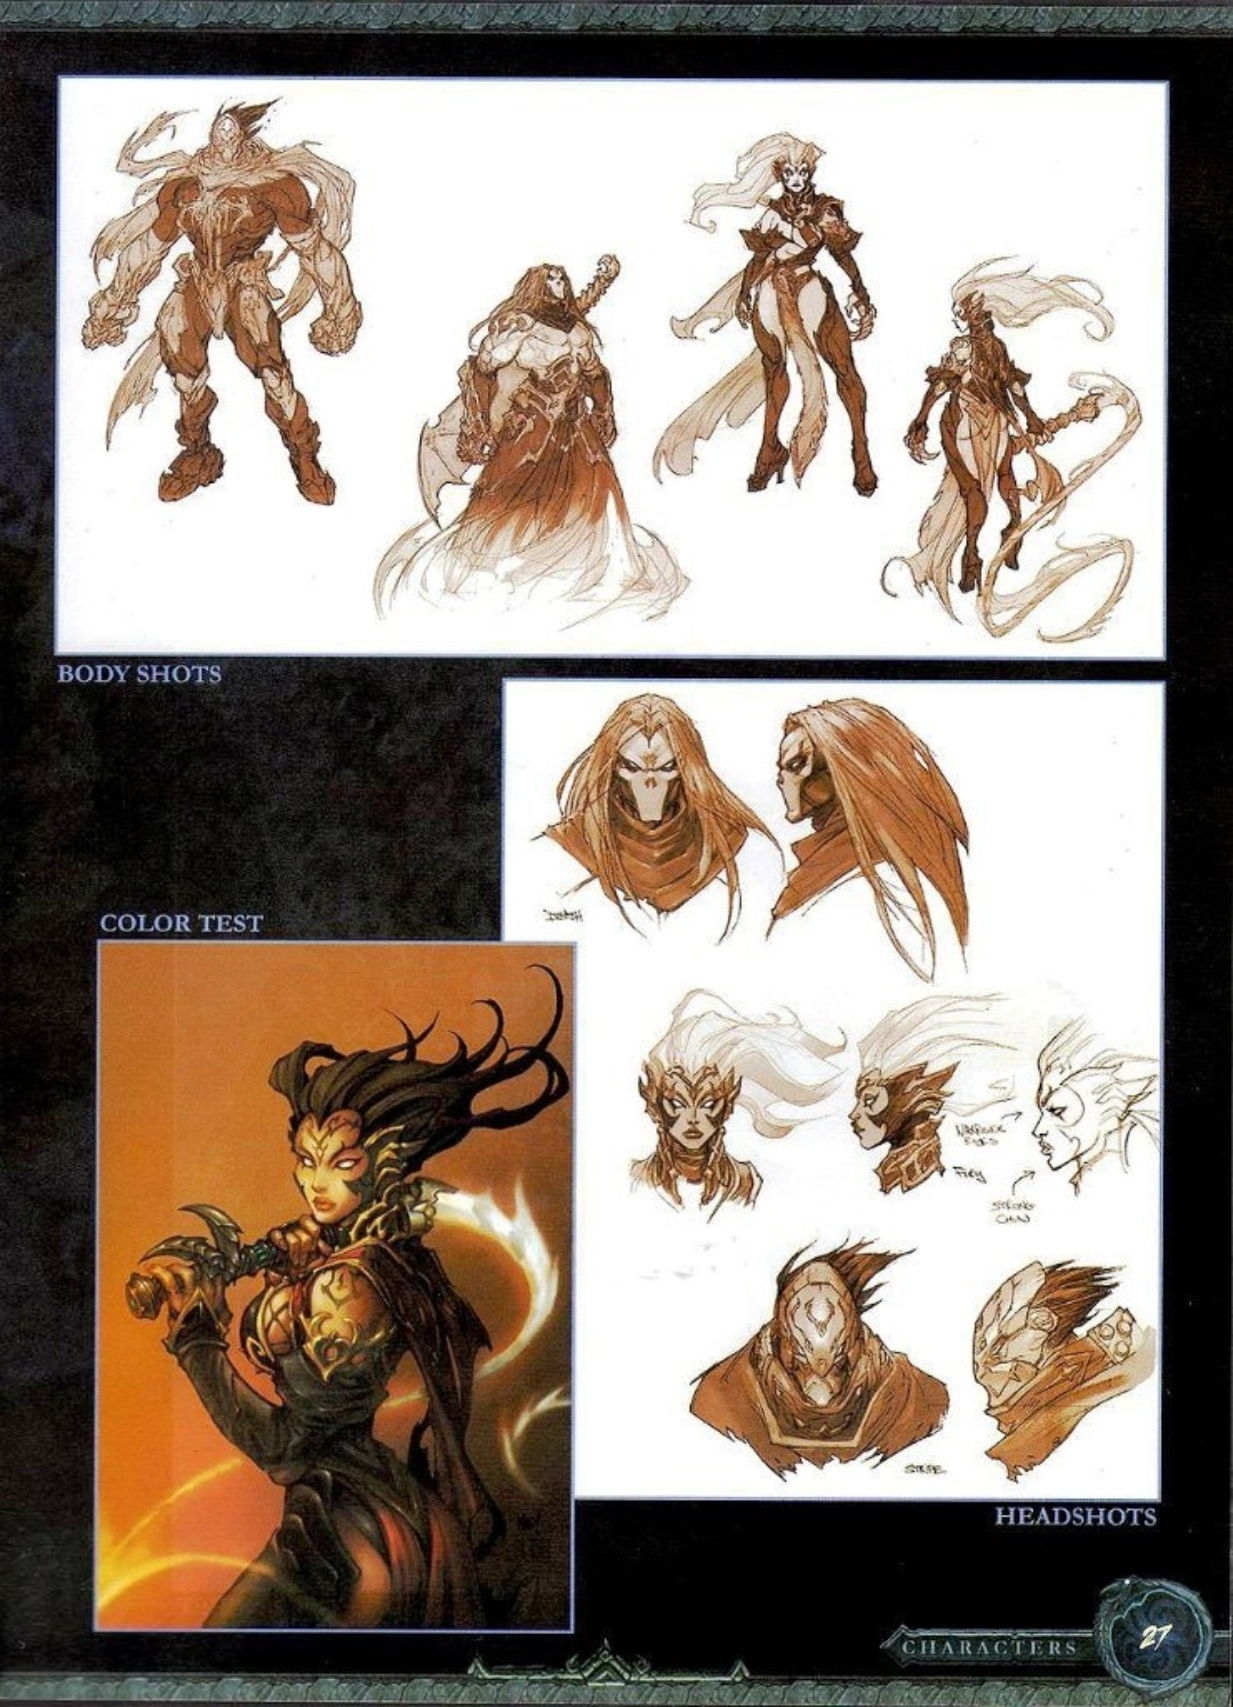 The Art of Darksiders (low-res, missing pages, and watermarked) 26